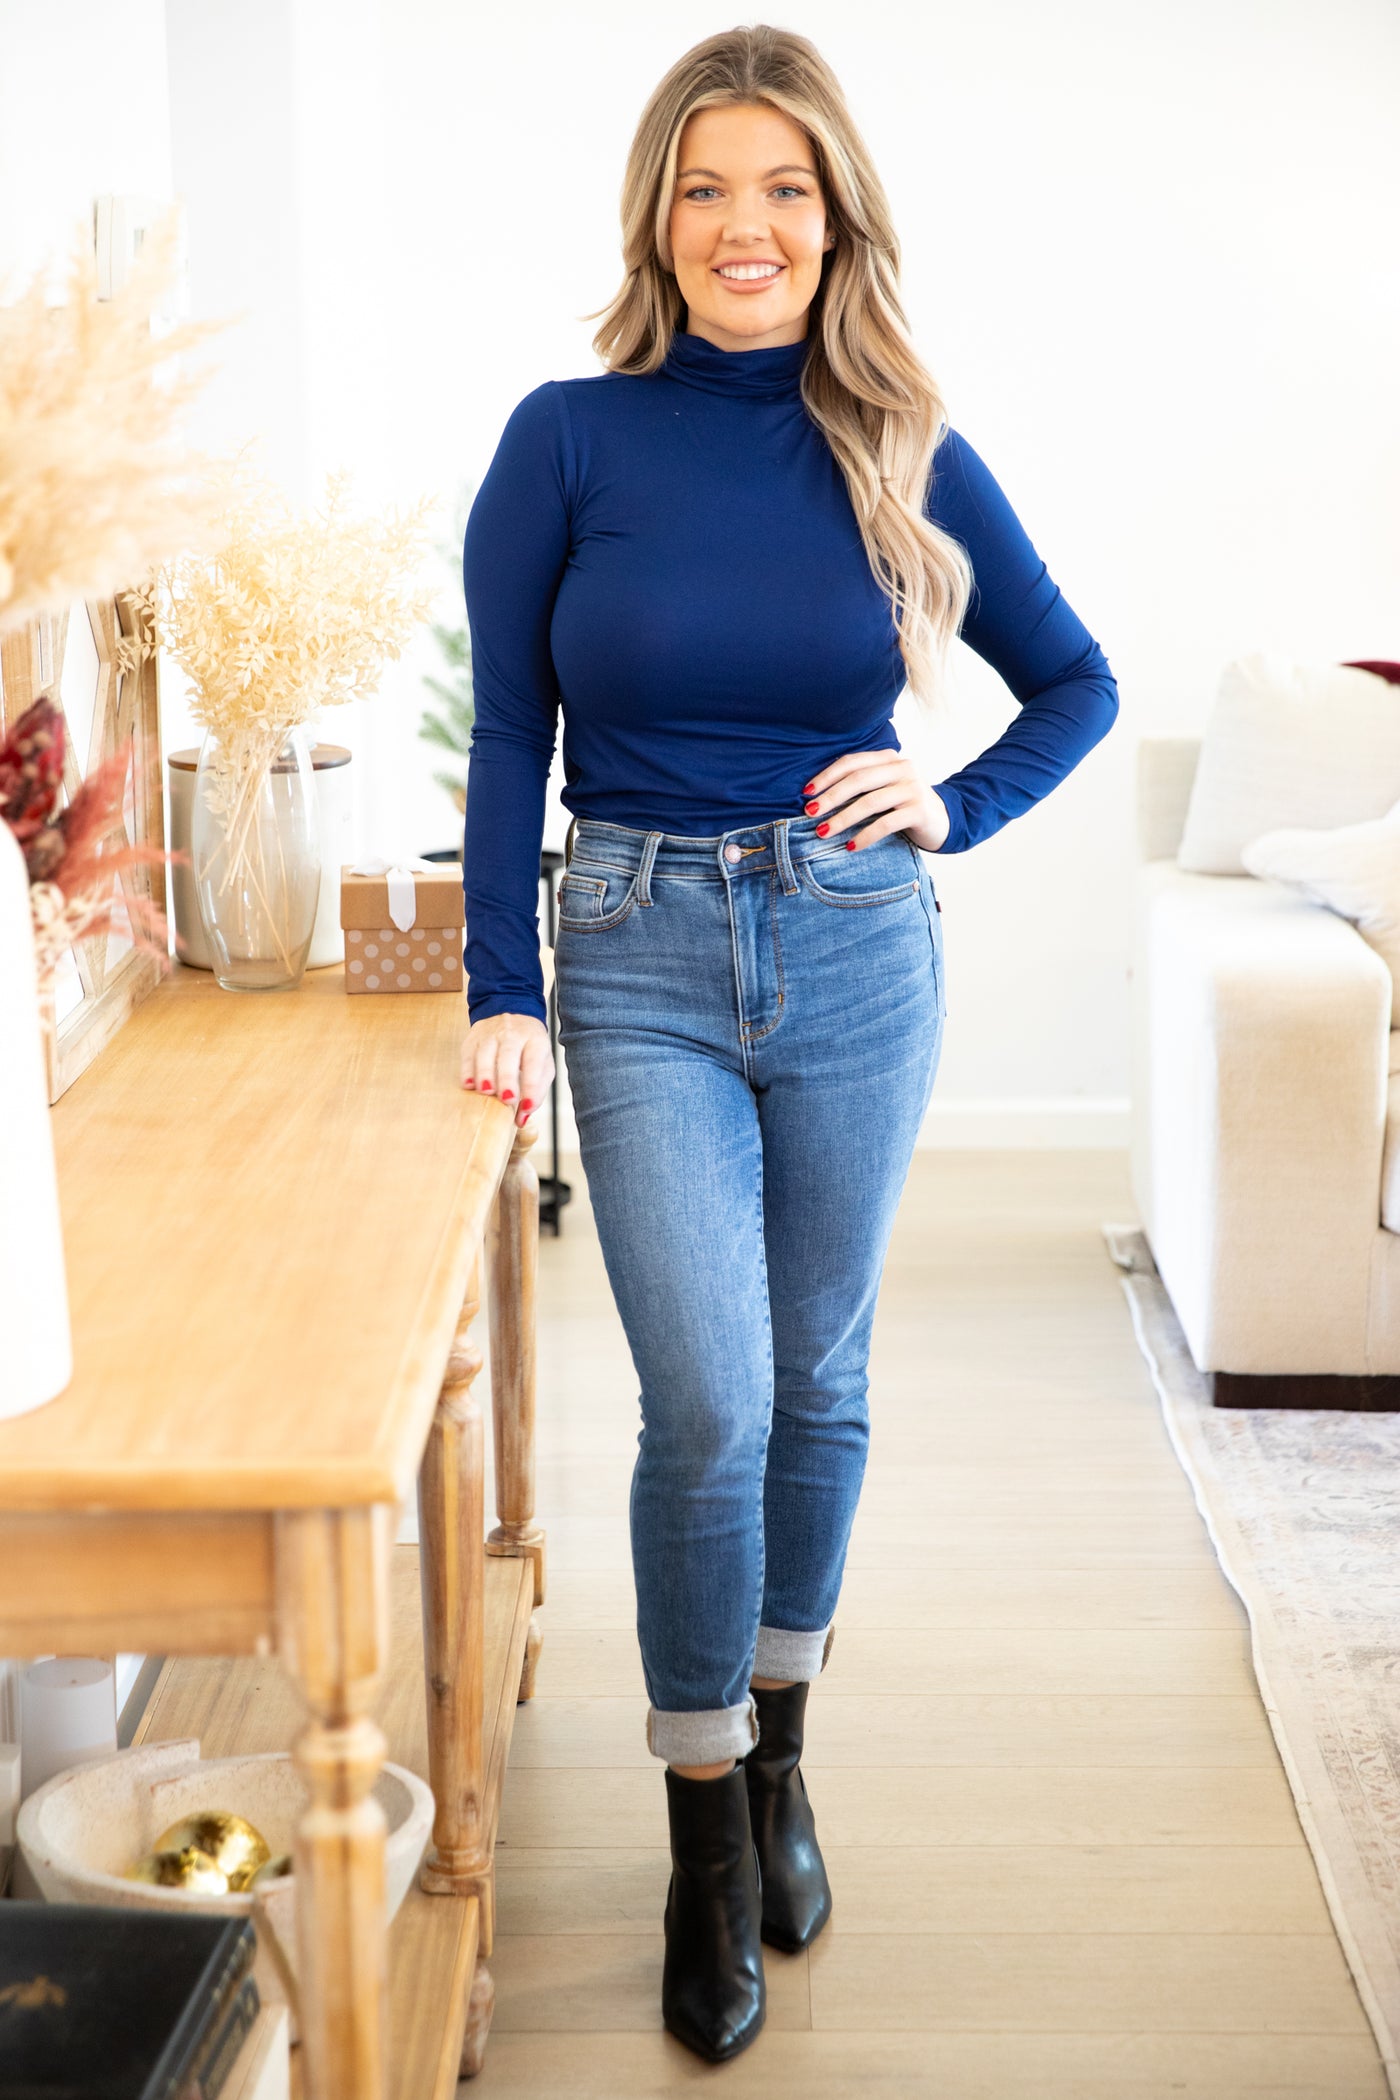 Navy Buttery Soft Turtleneck Top